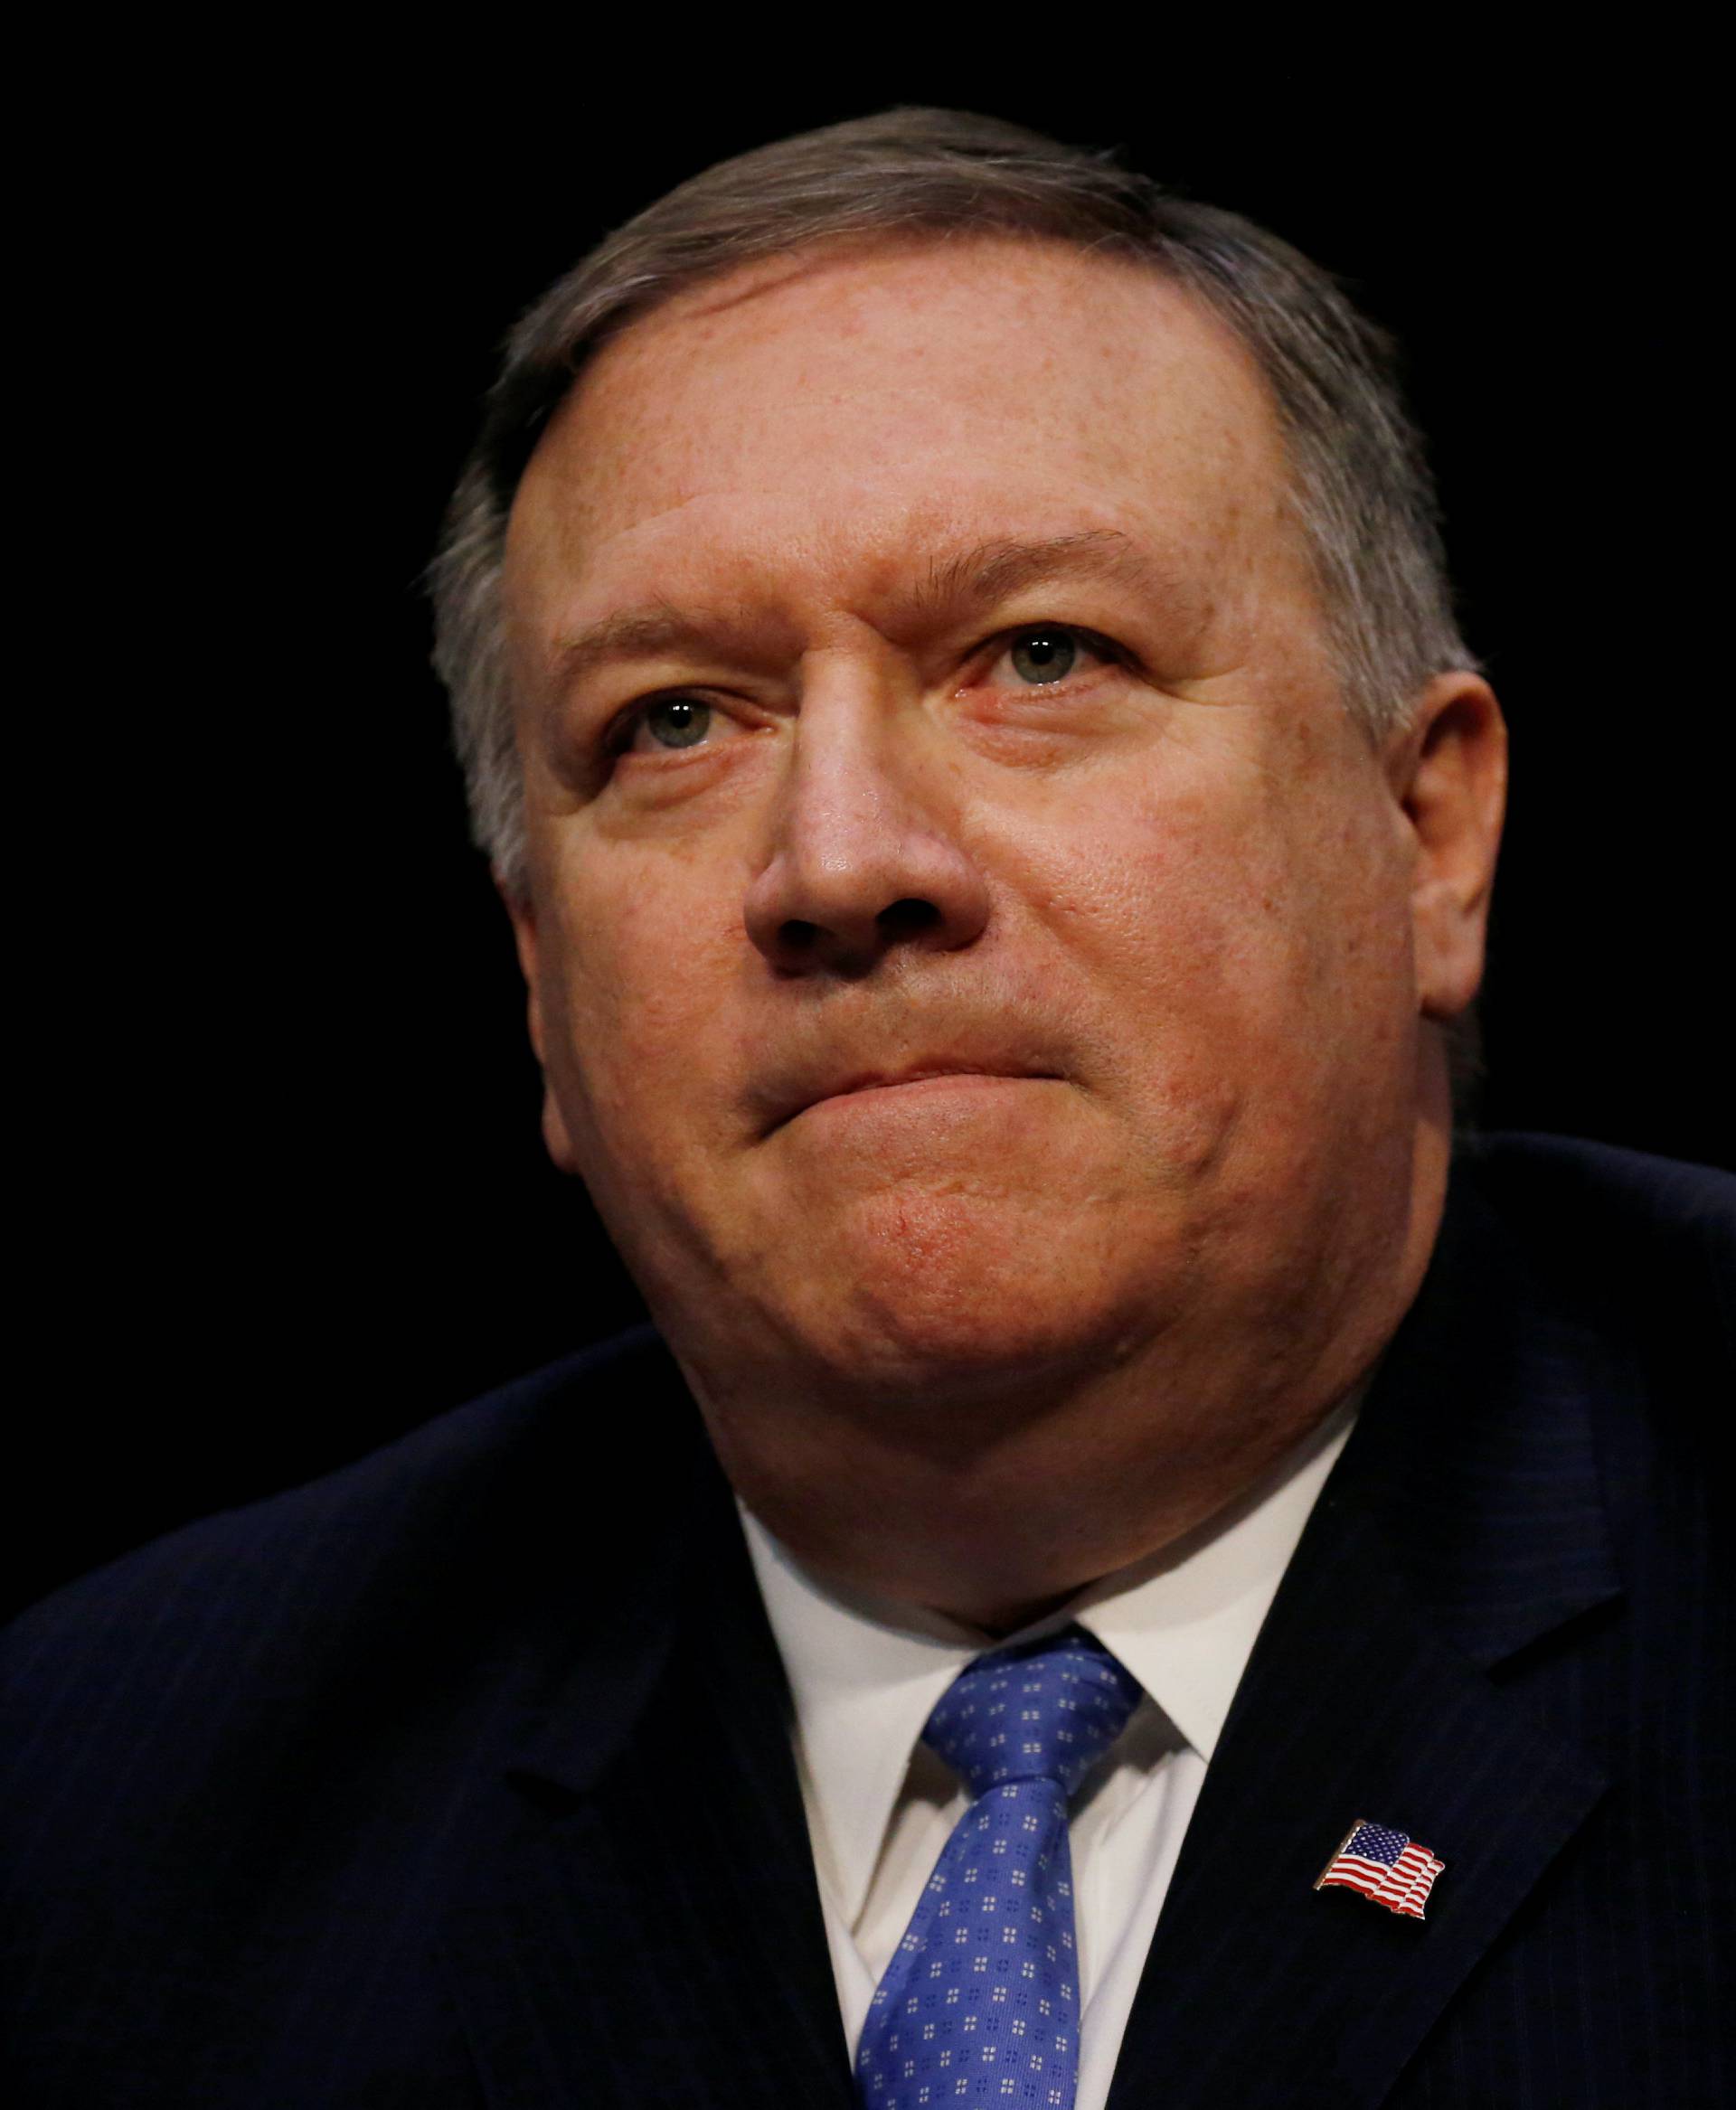 FILE PHOTO: CIA Director Mike Pompeo testifies during a Senate Intelligence Committee hearing on "Worldwide Threats" on Capitol Hill in Washington